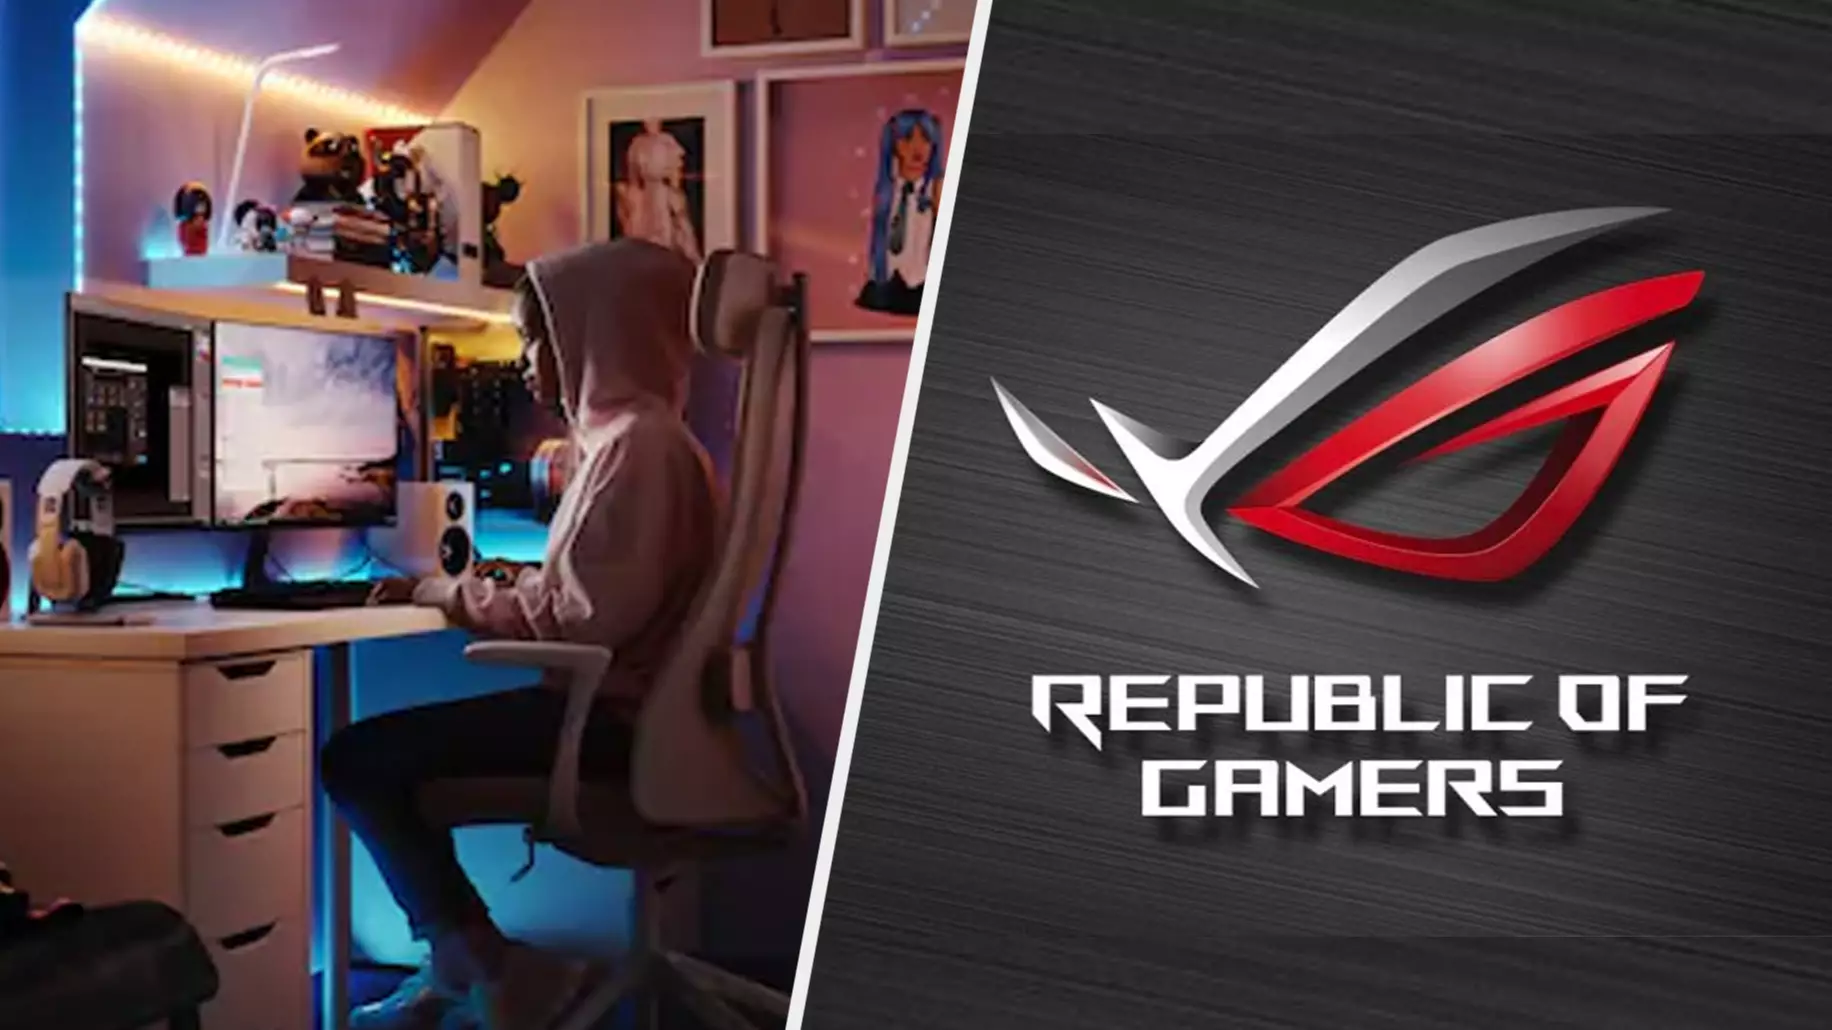 IKEA Is Bringing Out A Line Of Pro Gaming Furniture With ASUS ROG